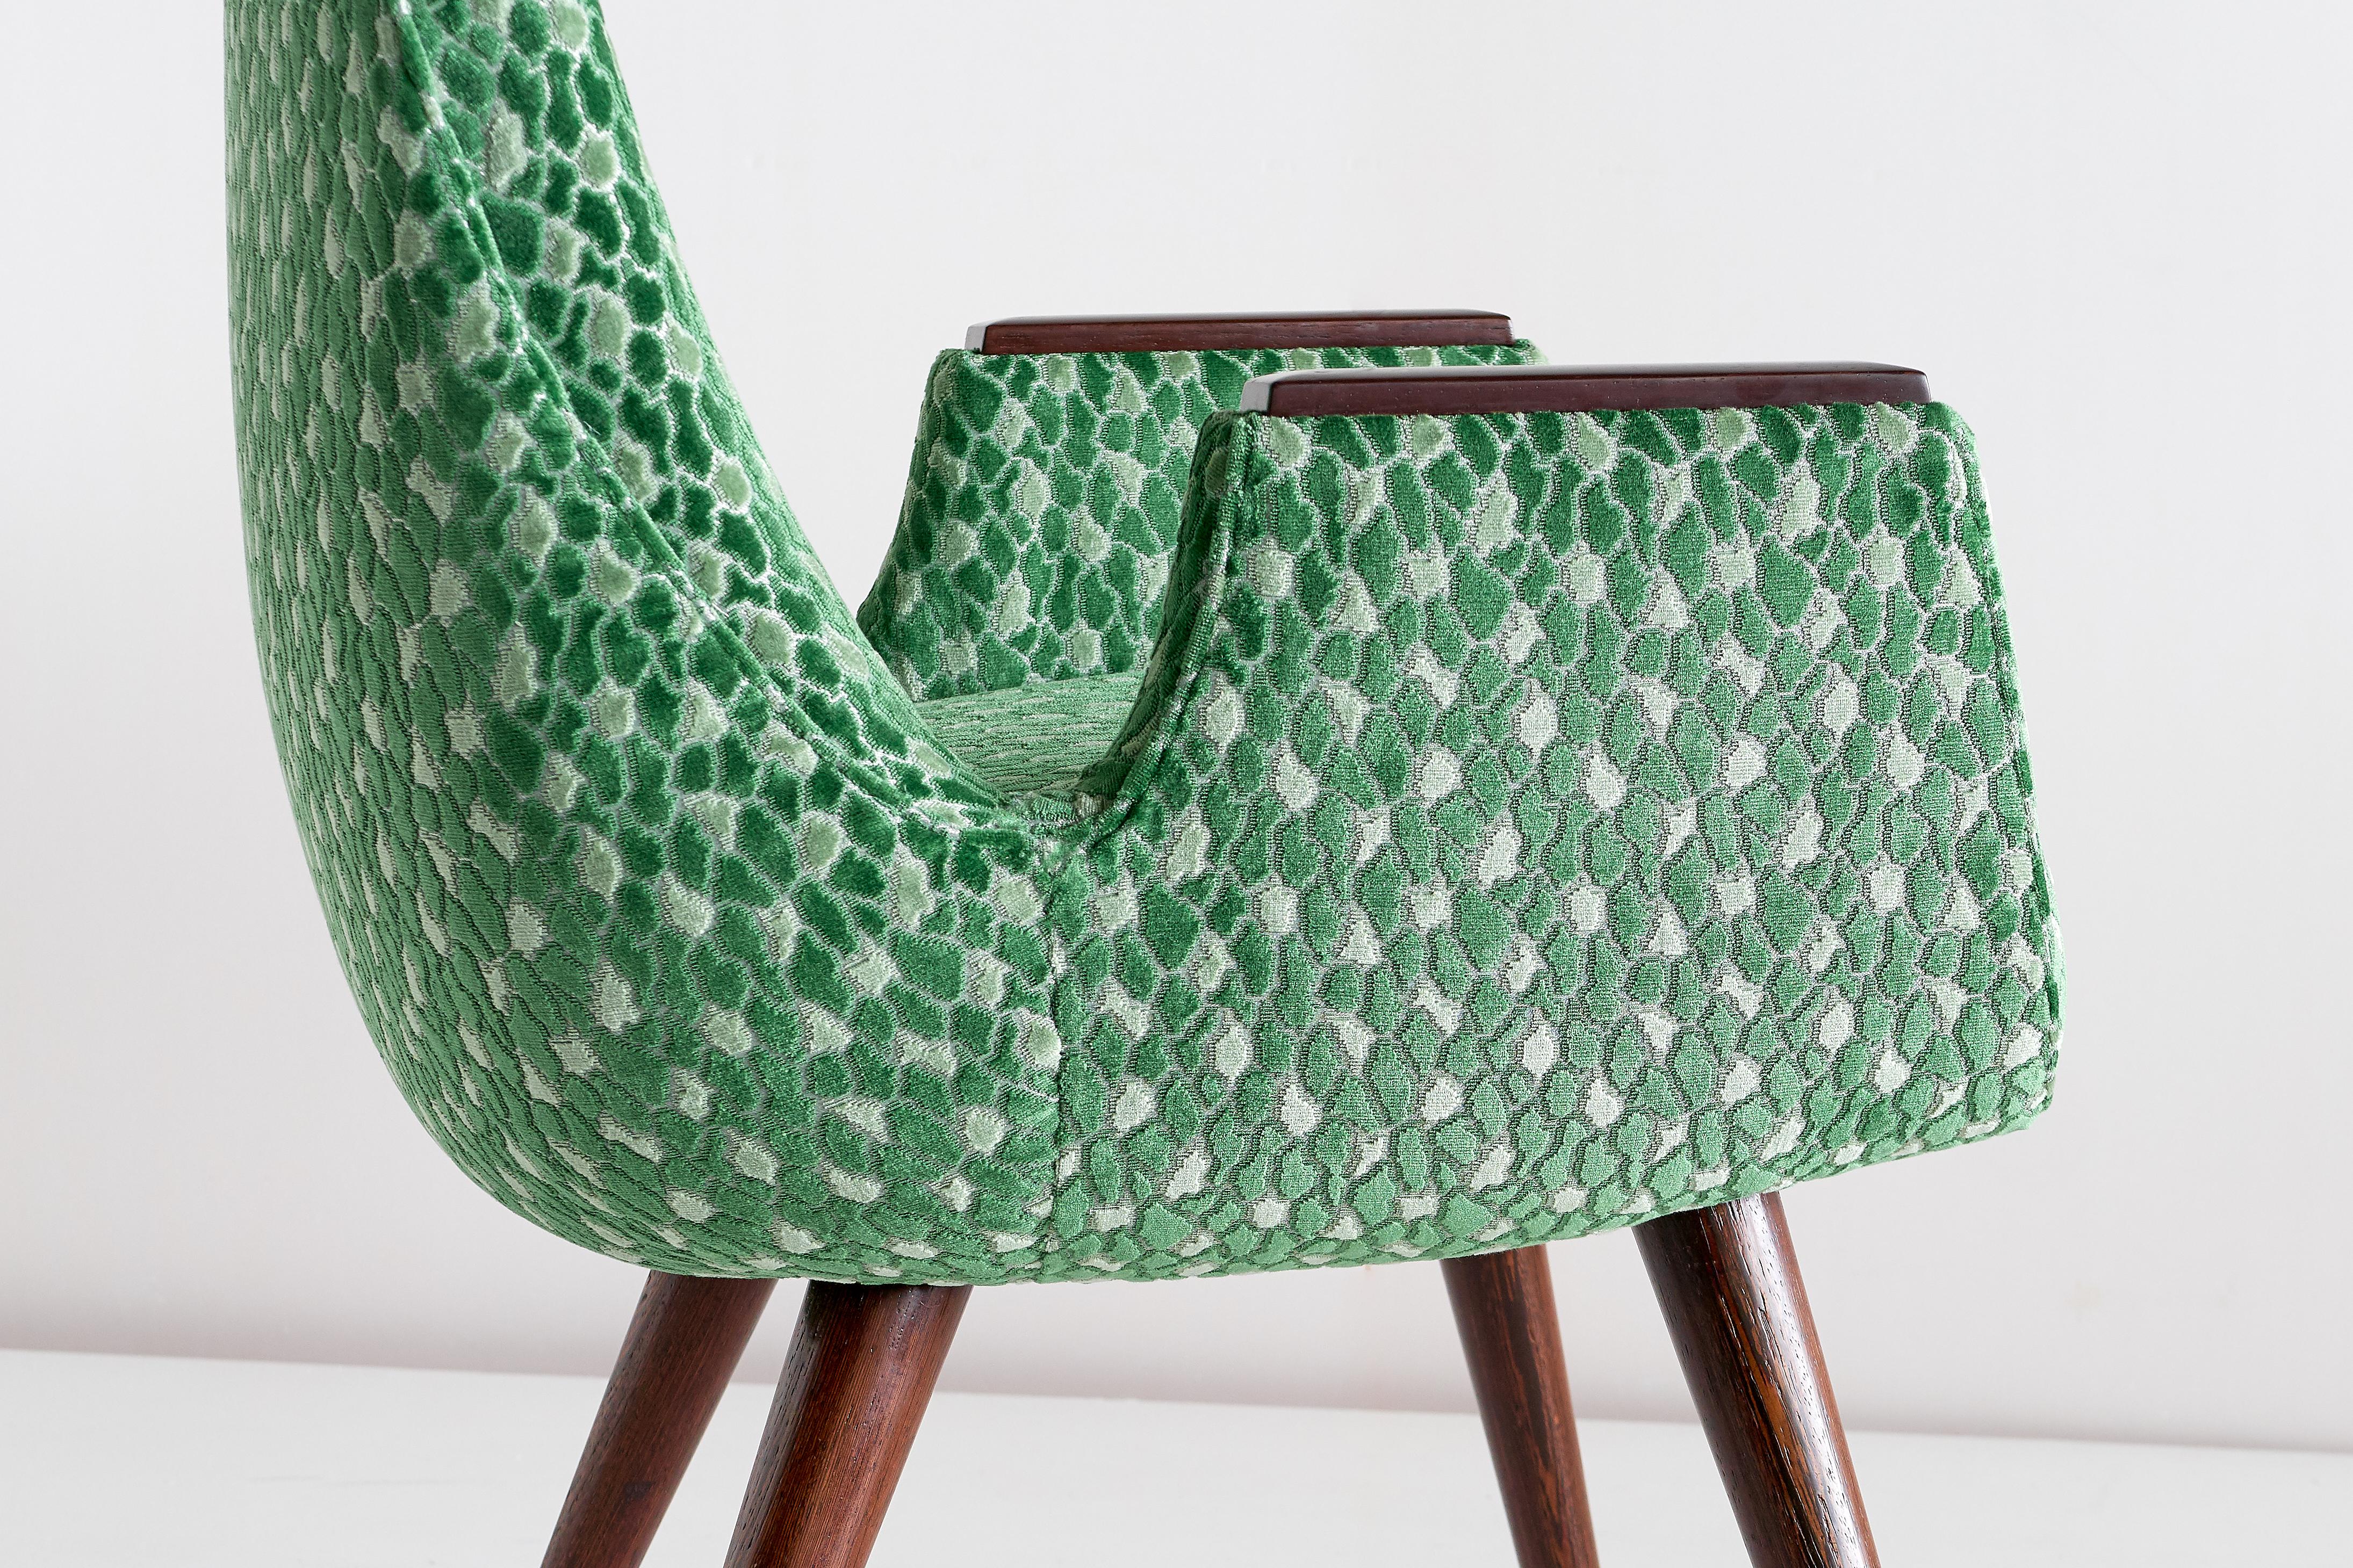 Pair of High Back Armchairs in Green Braquenié Velvet and Wengé Wood, 1950s For Sale 1